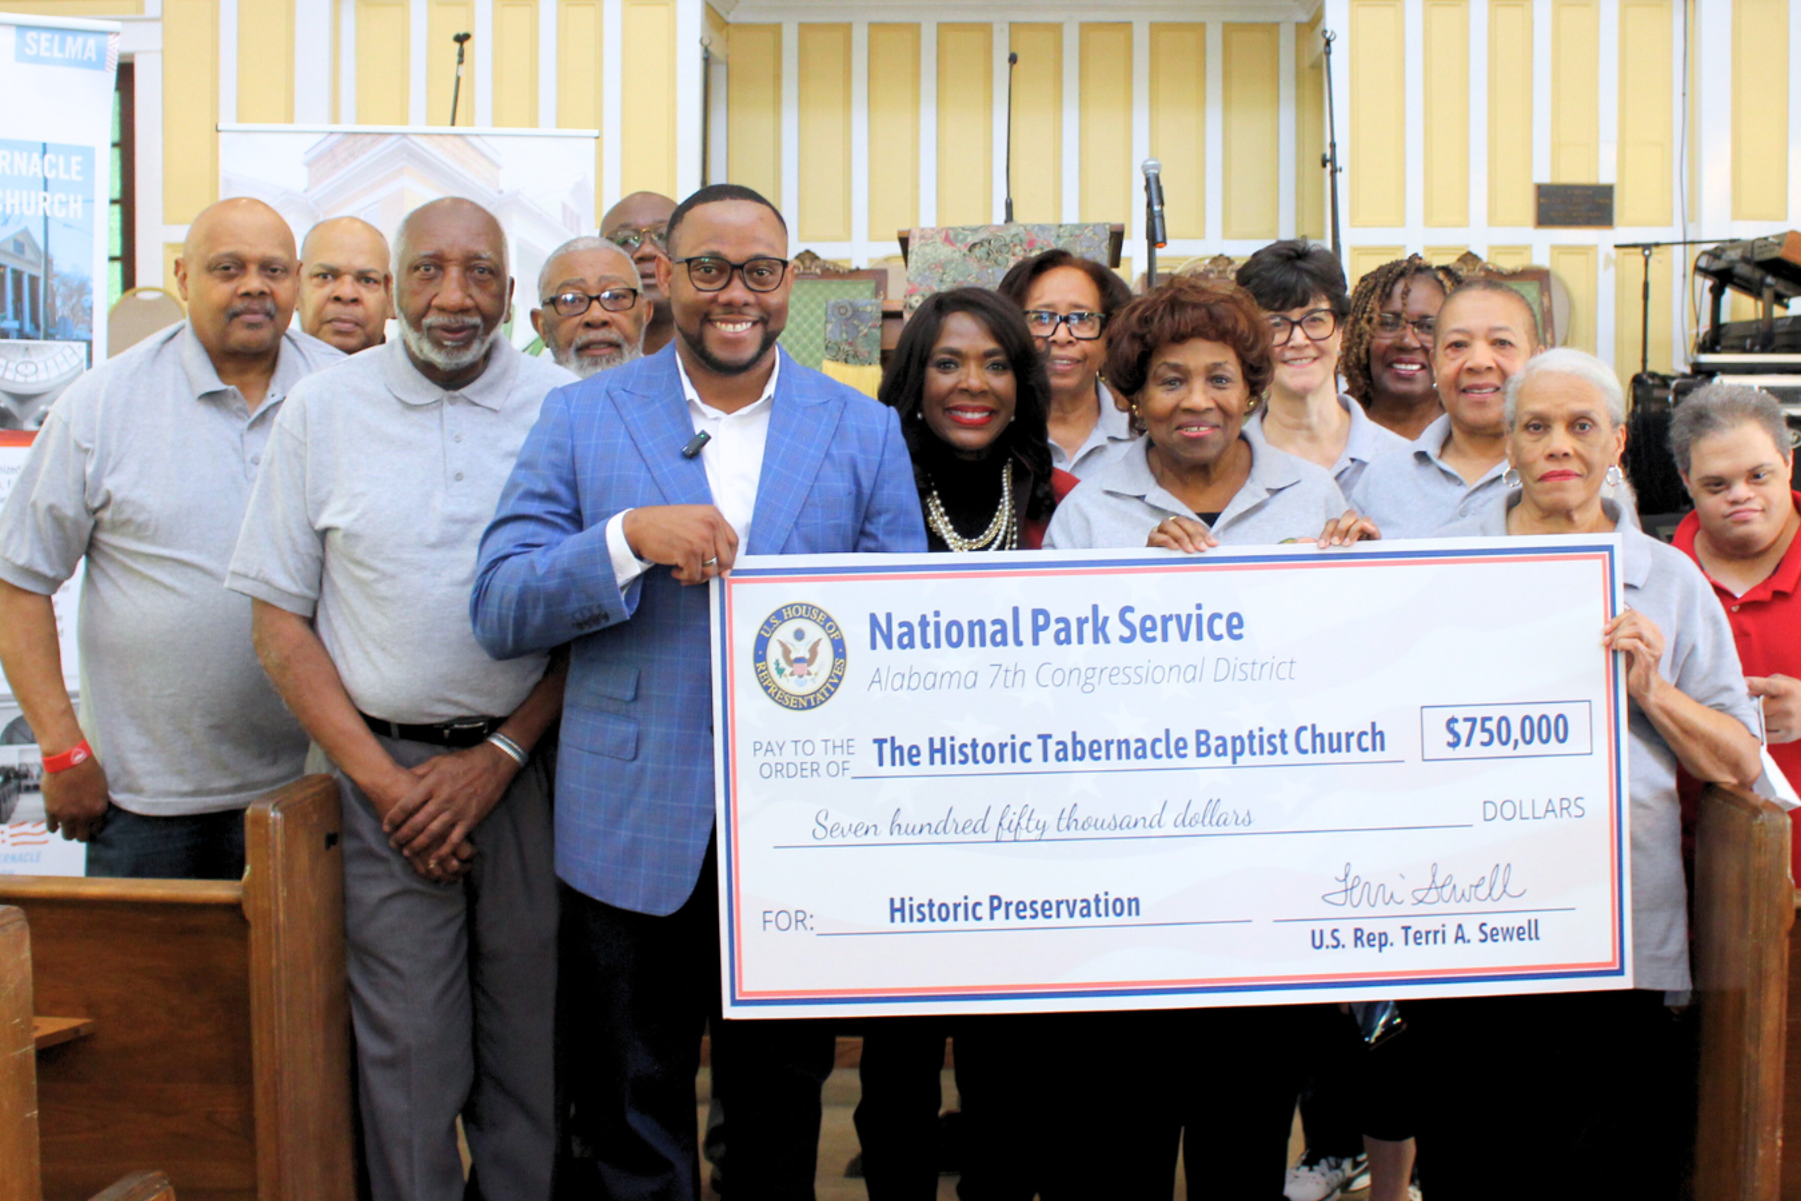 Read More - Rep. Sewell Announces $3 Million from the National Park Service to Preserve Historic Civil Rights Sites in Alabama